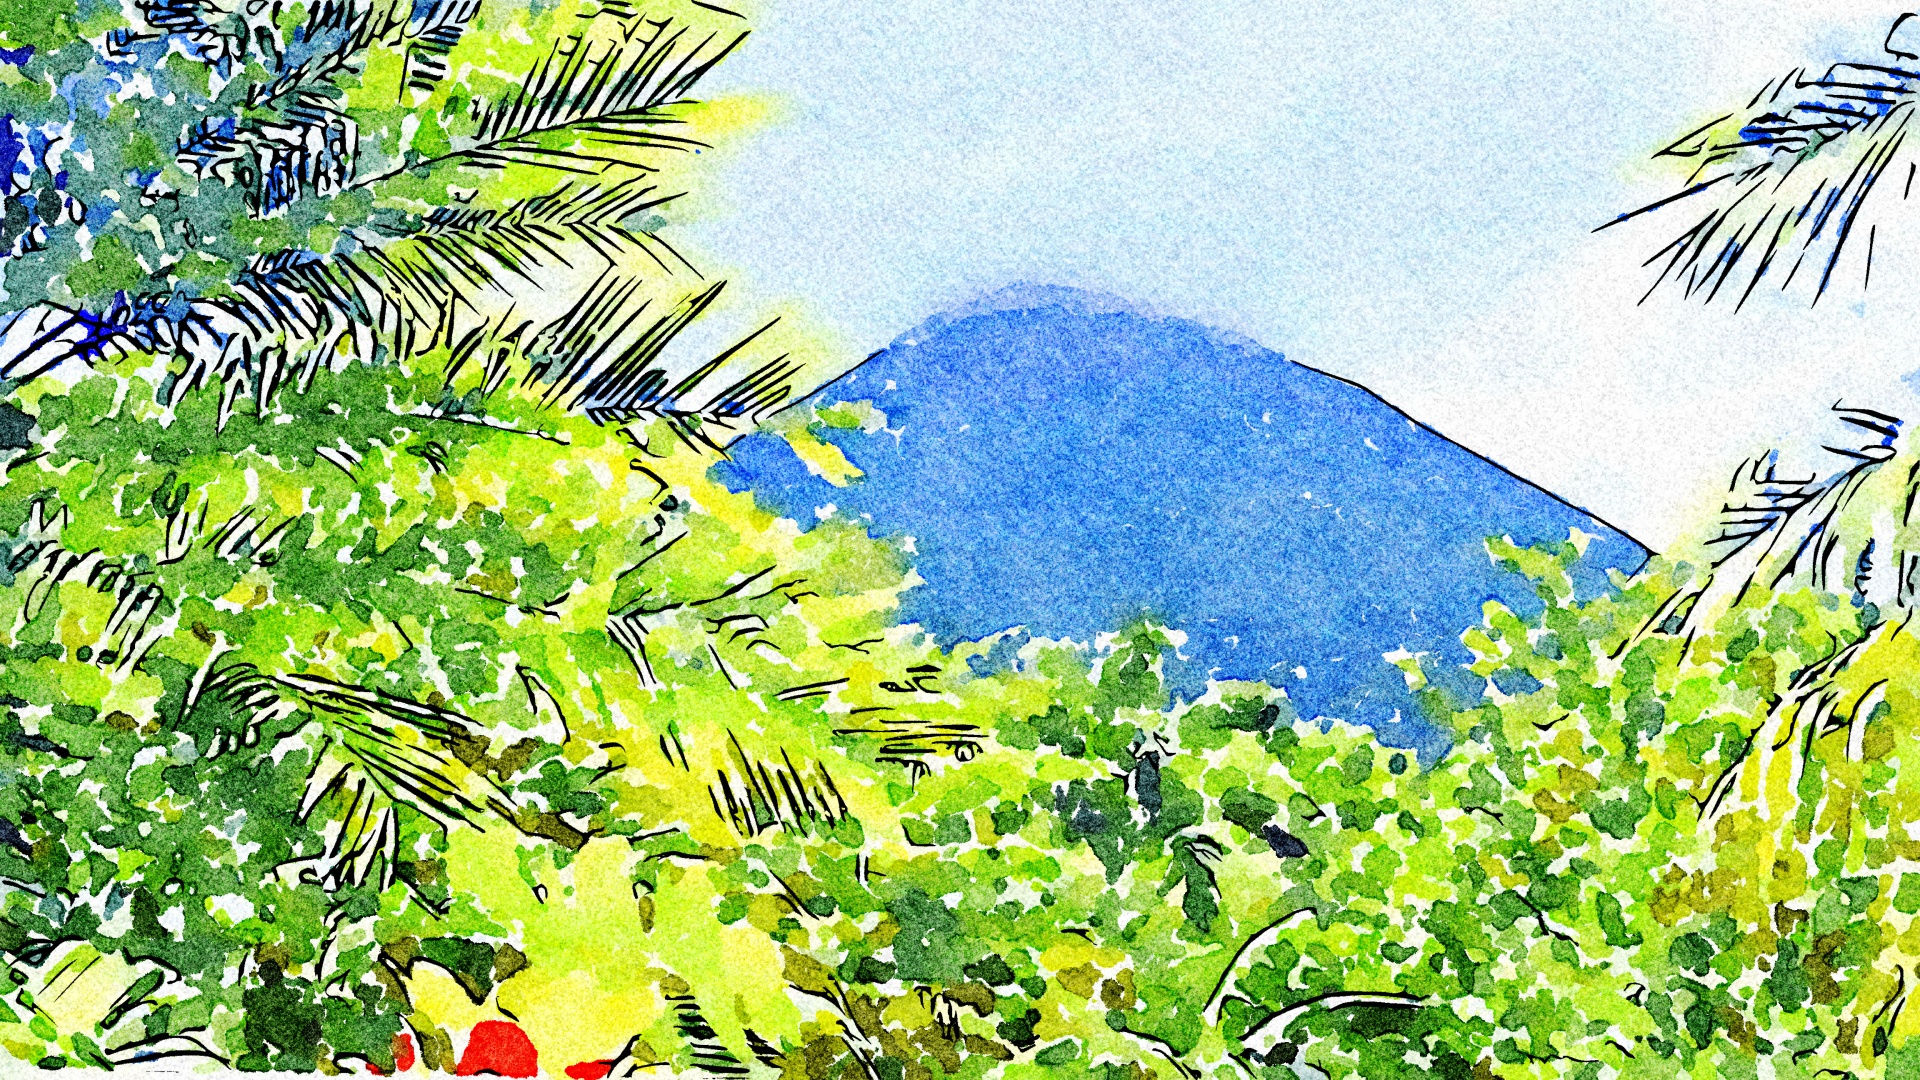 Arenal volcano, painted in watercolor. Very colorful.